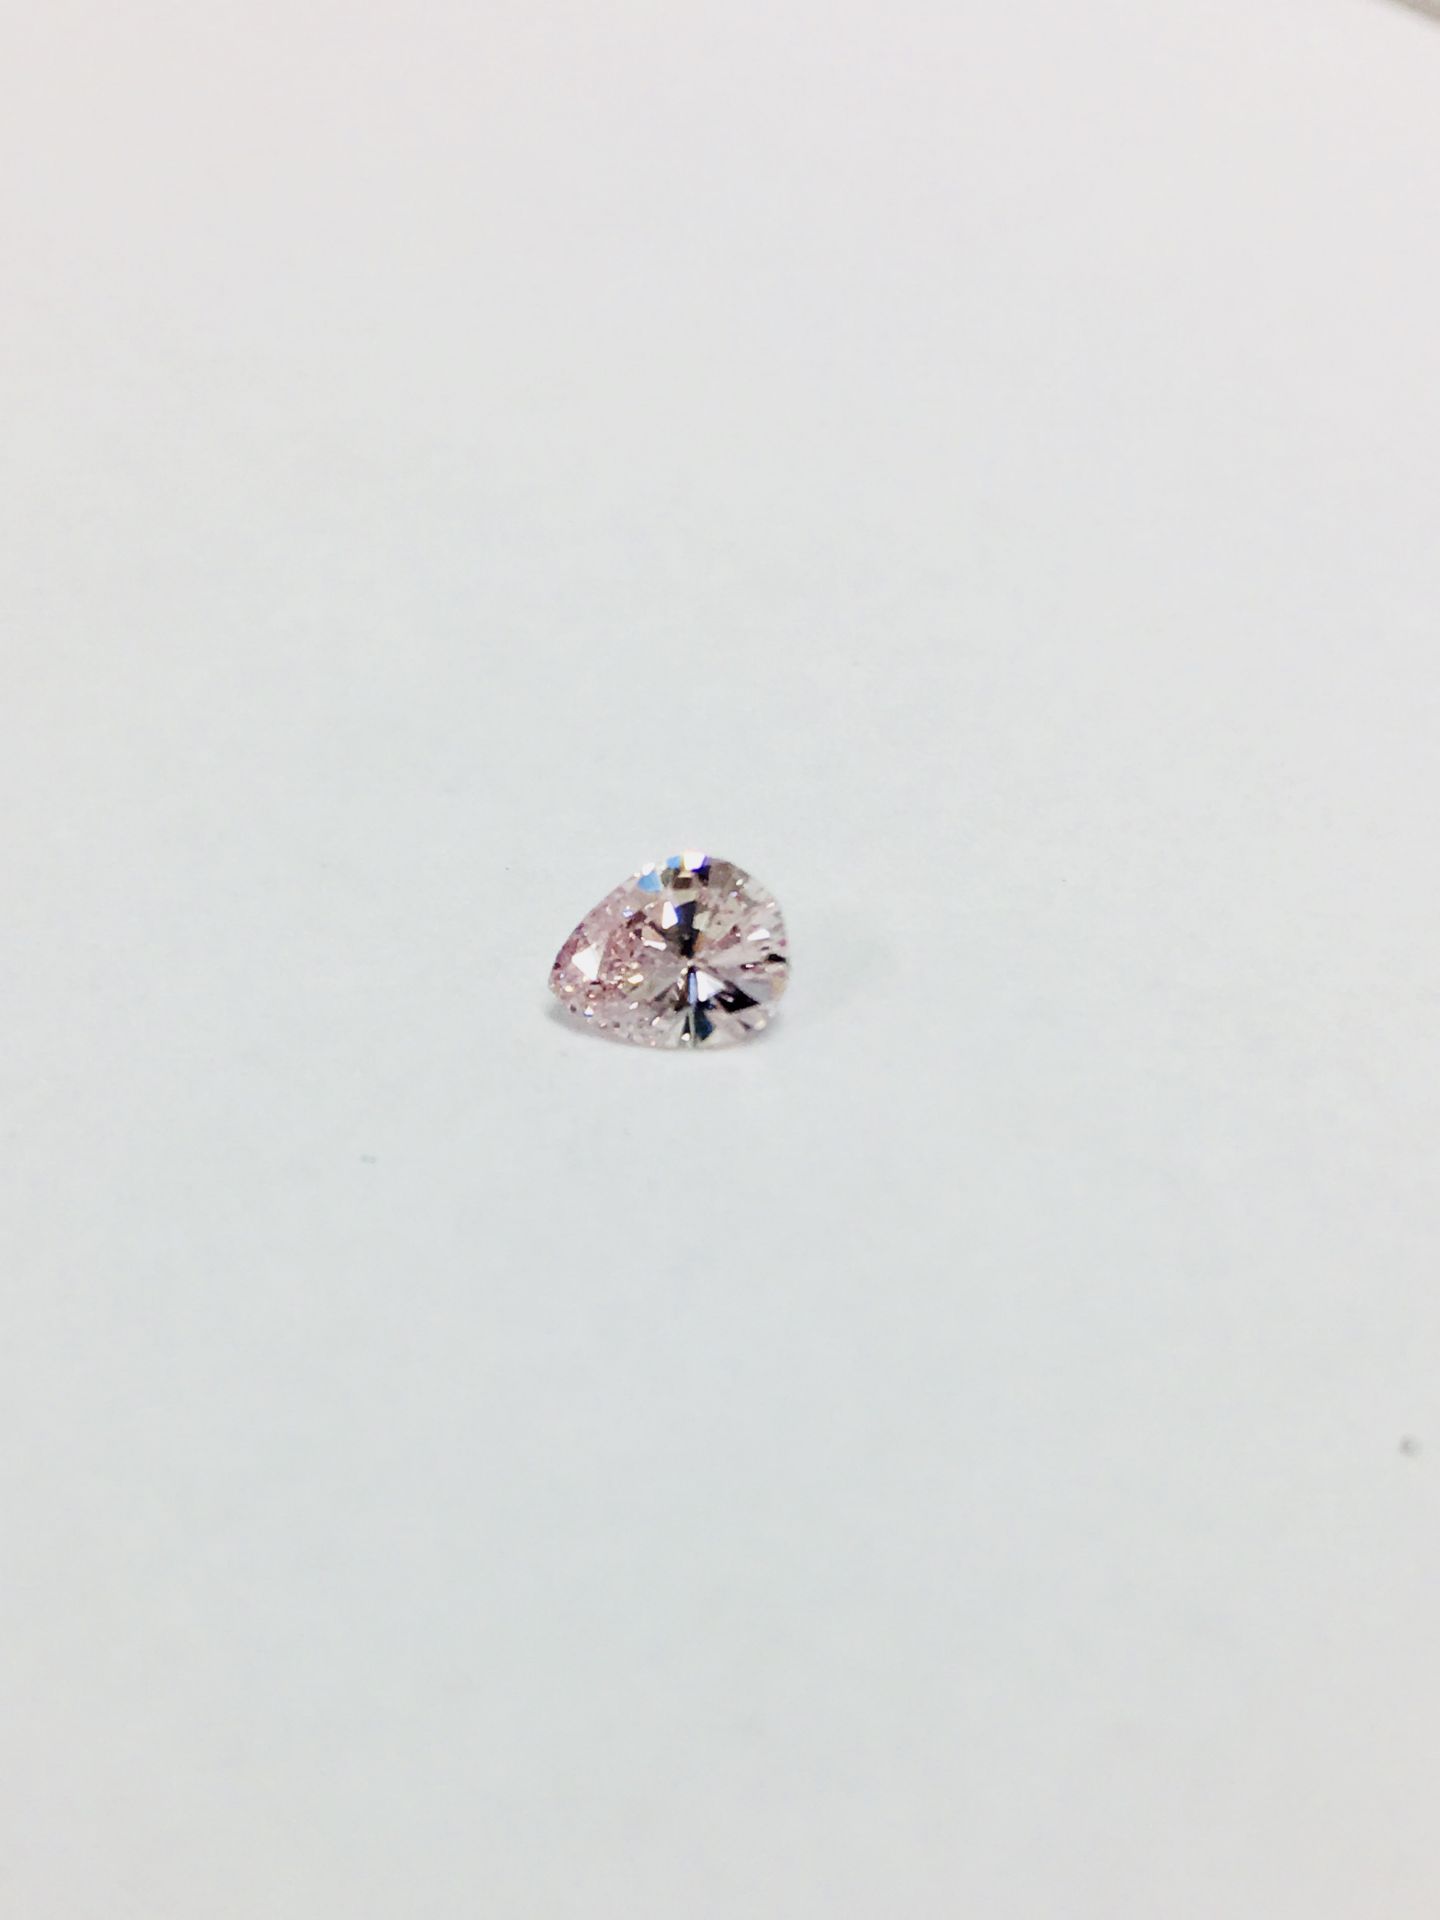 Pink Pearshape diamond ,0.42ct natural pink diamond,GIA certification 2166688540,apprsial 15000